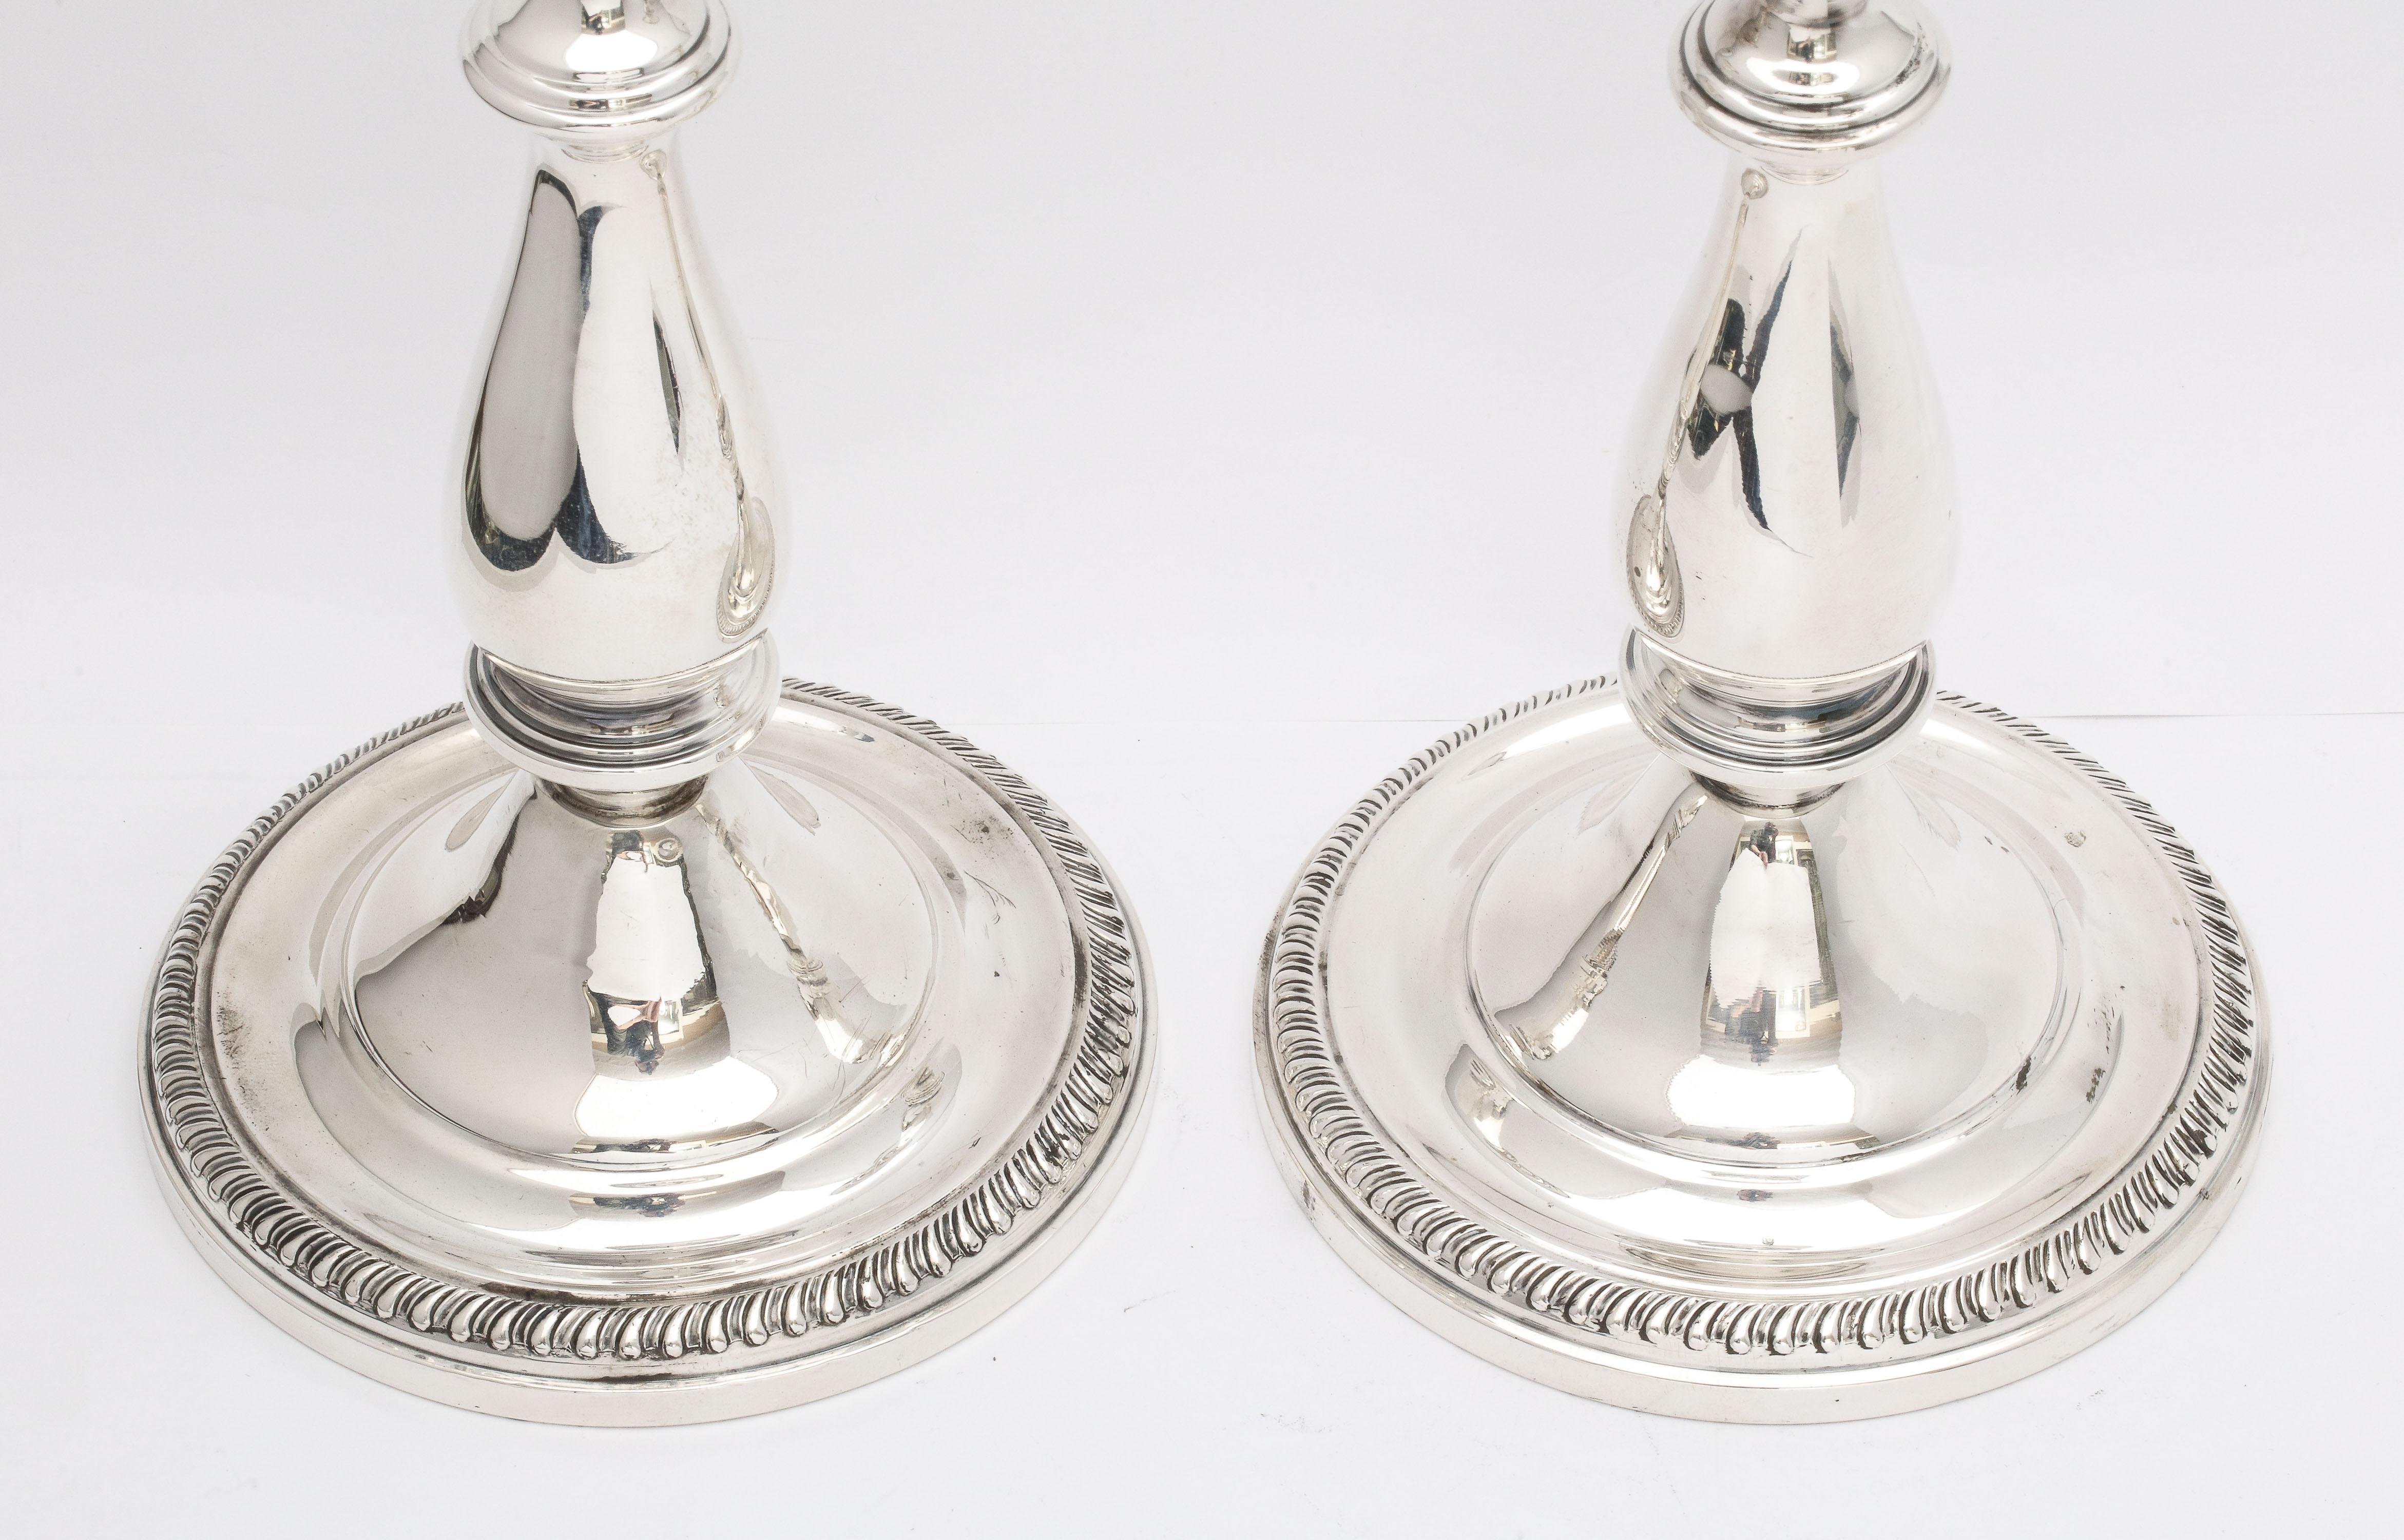 Edwardian-Style Pair of Sterling Silver Candlesticks  For Sale 4